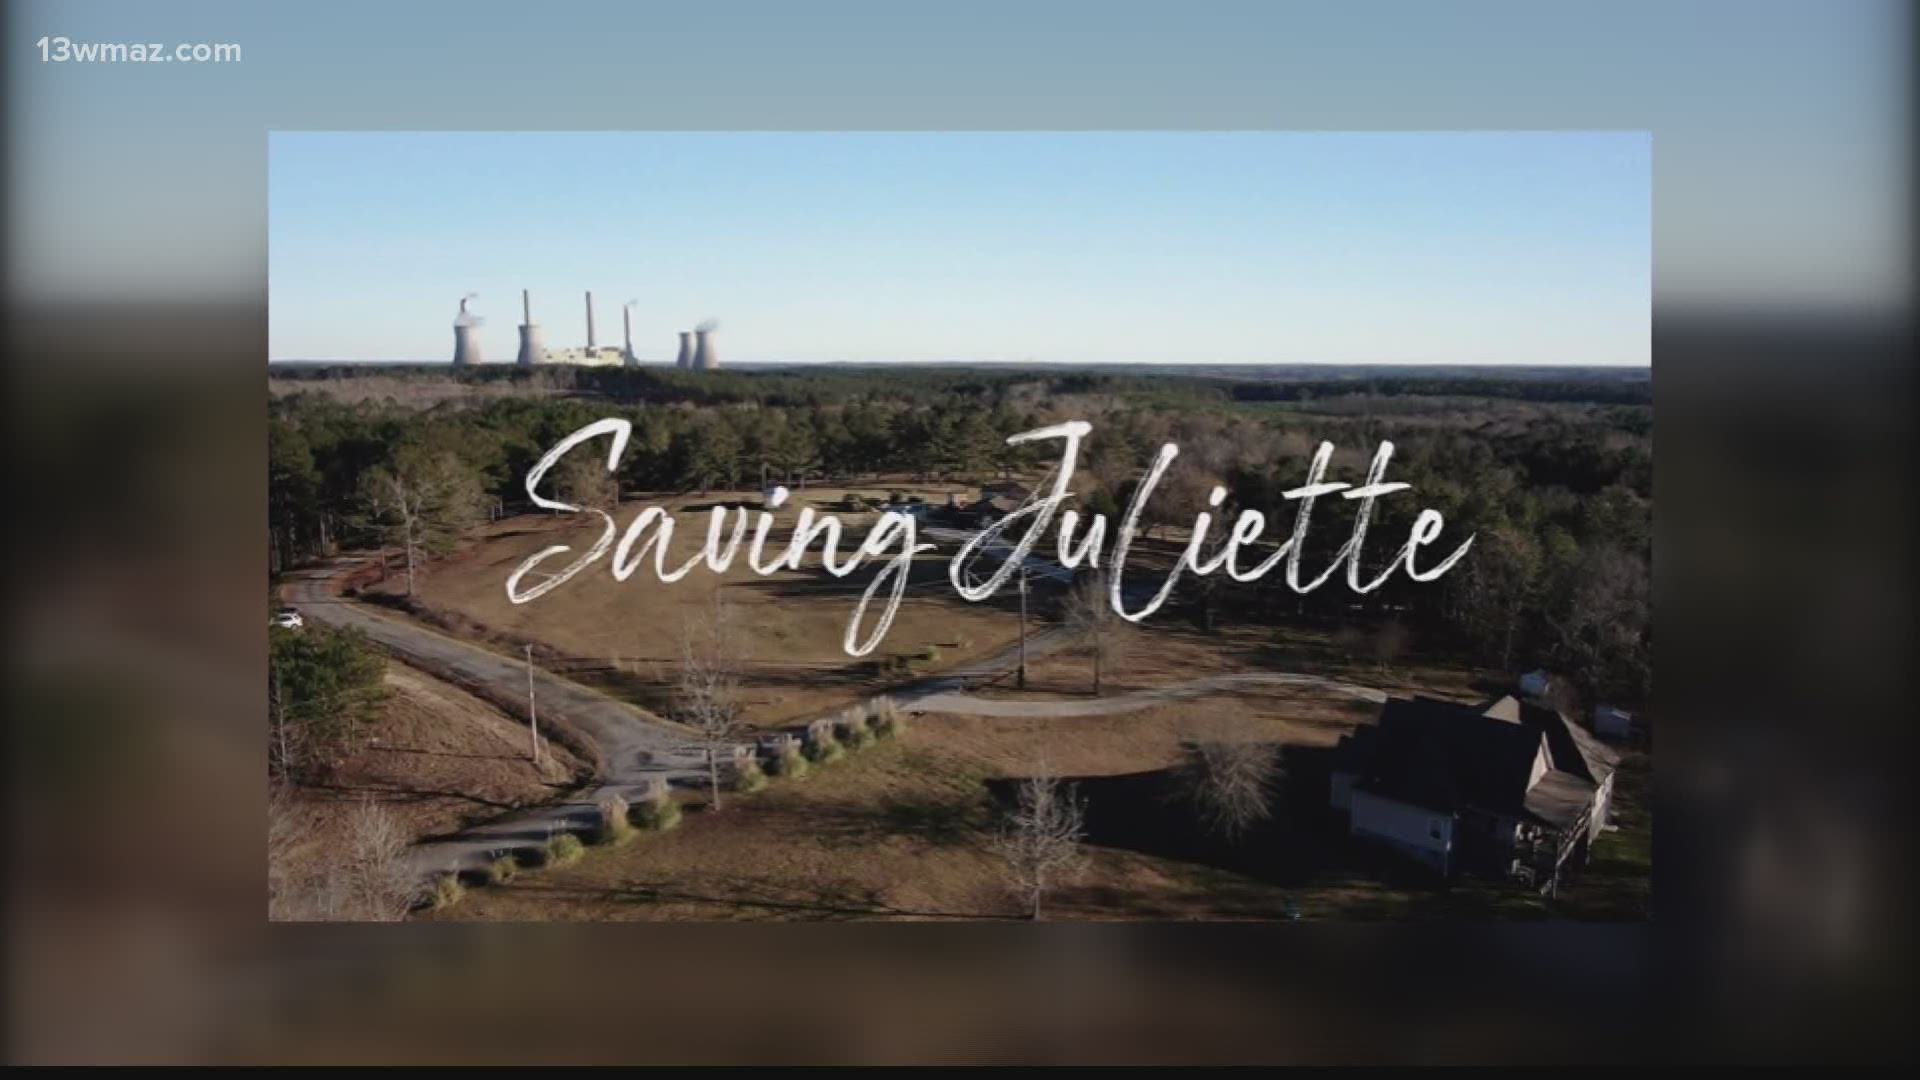 The documentary depicts the city of Juliette in Monroe County and their struggle to get clean water